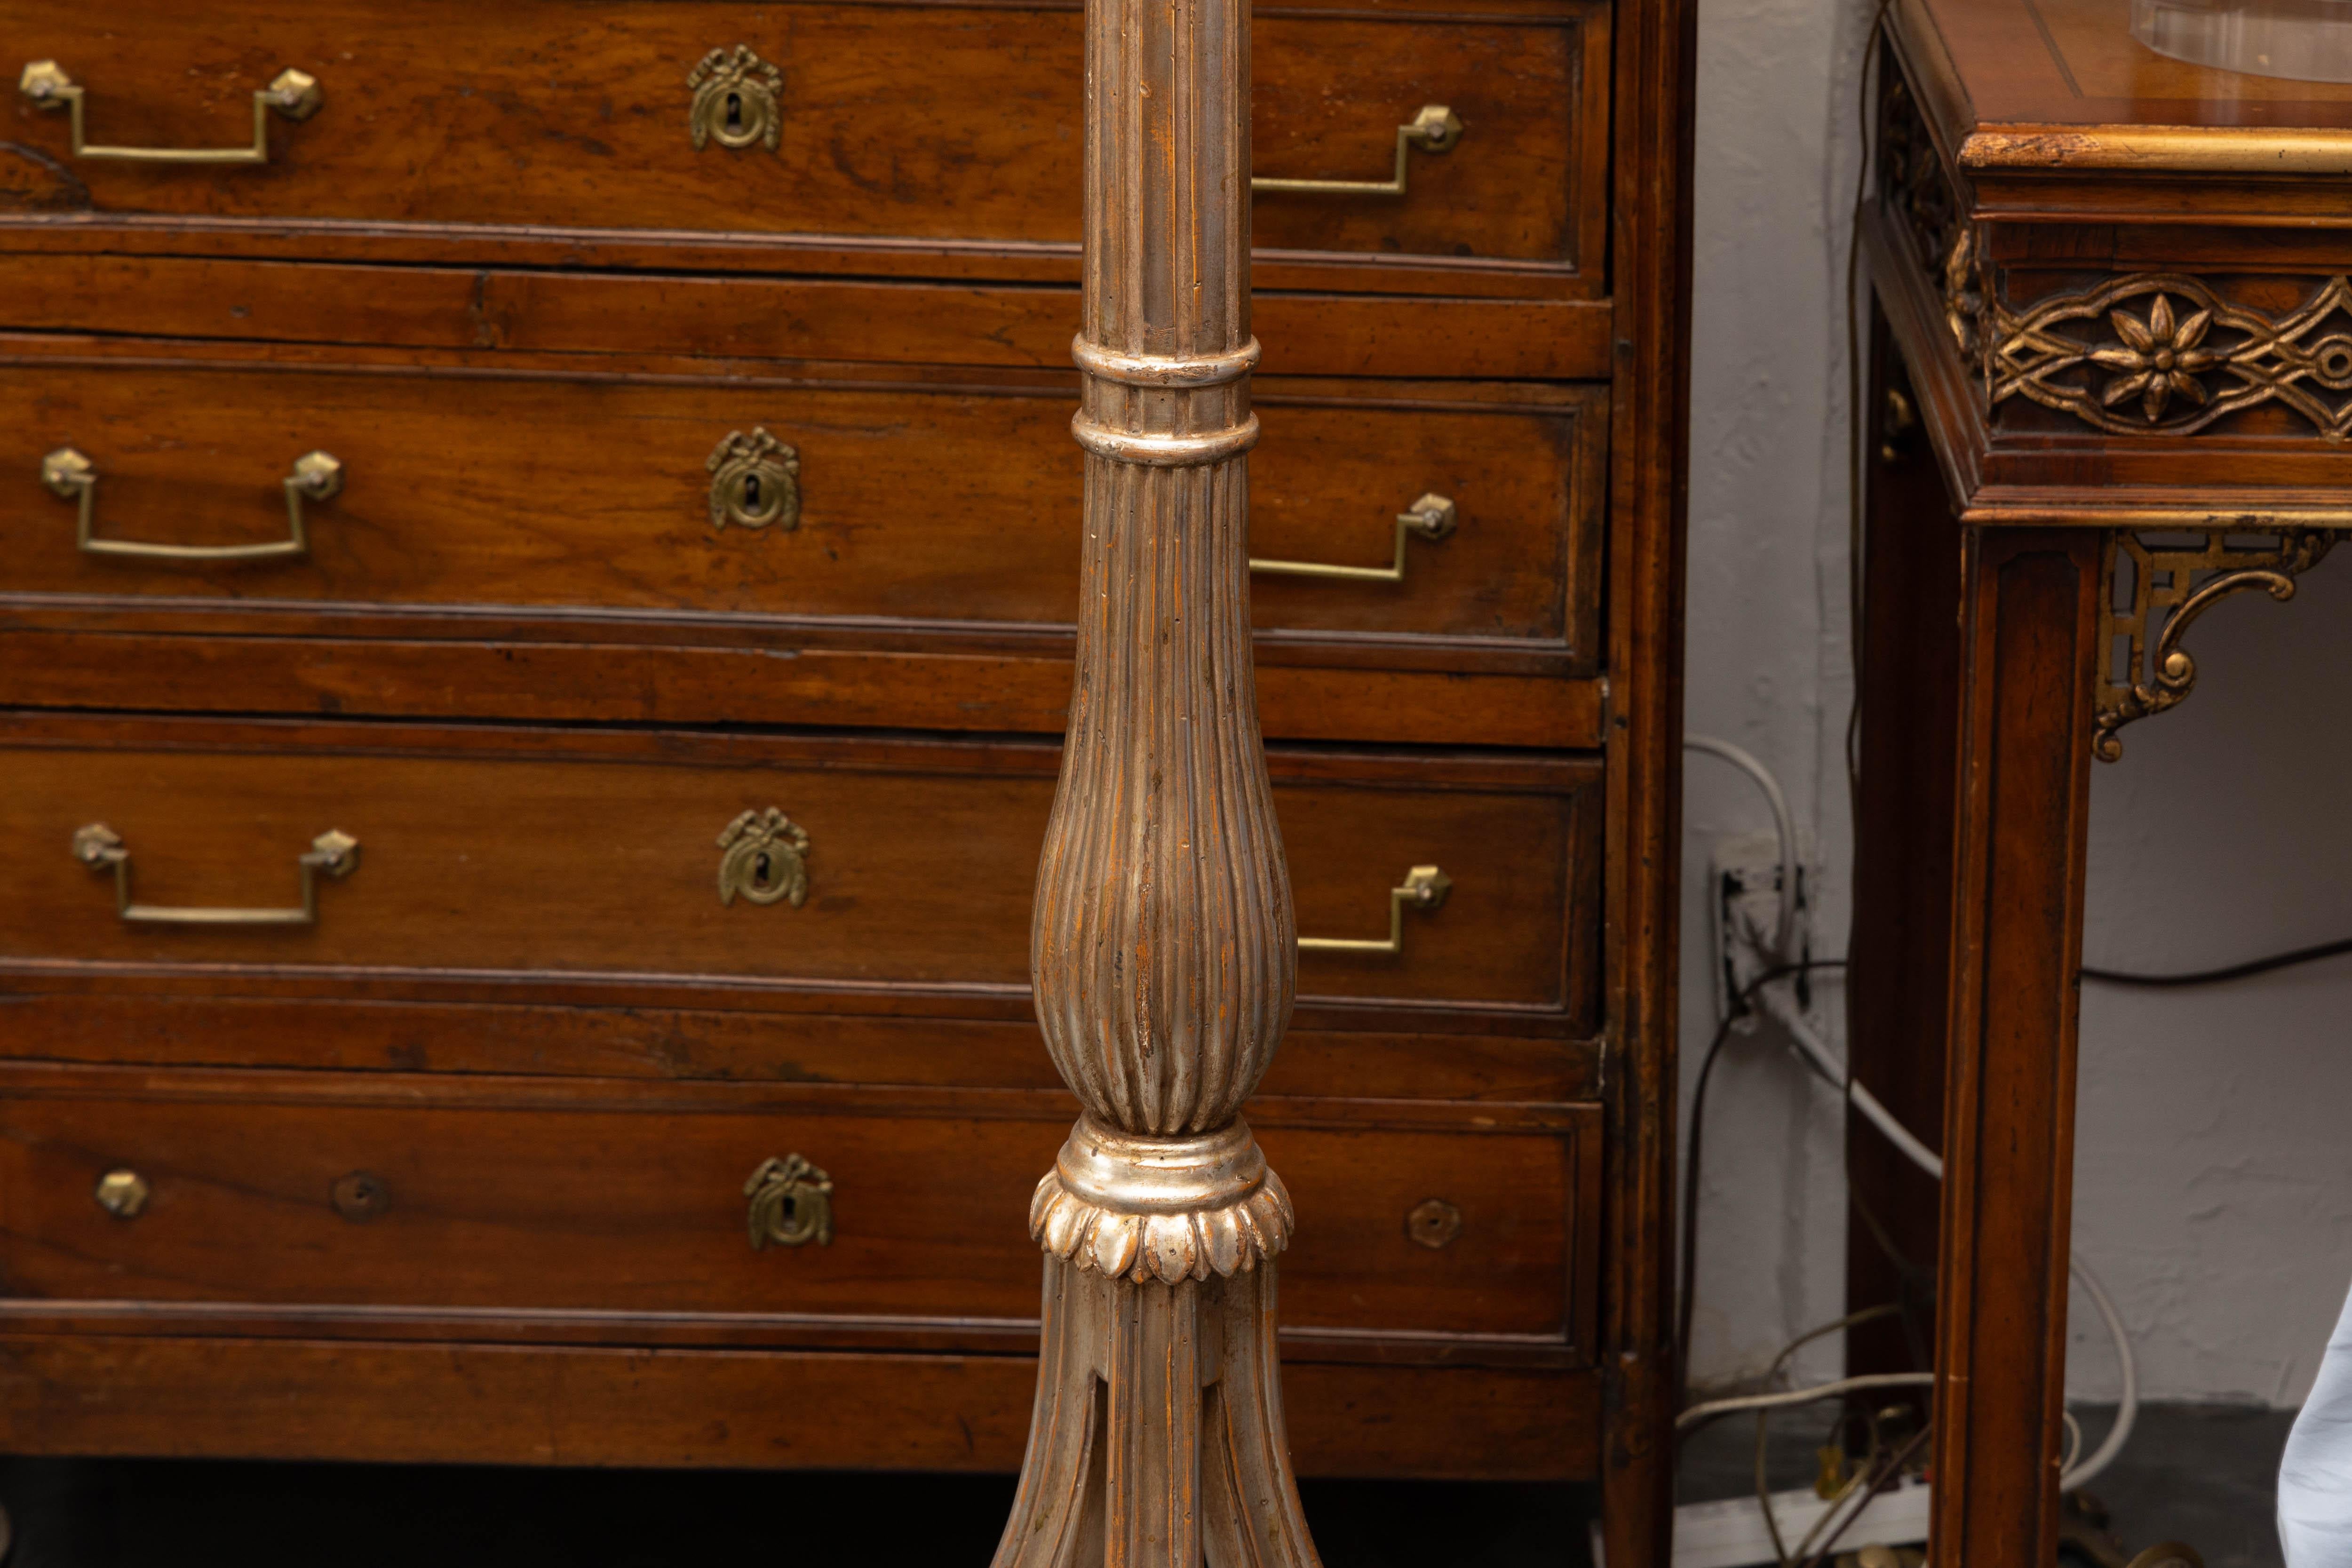 This is an elegant Italian hand carved silver-gilt floor lamp with a circular fluted stem, situated on a scrolling tripartite base attached to a solid plinth.